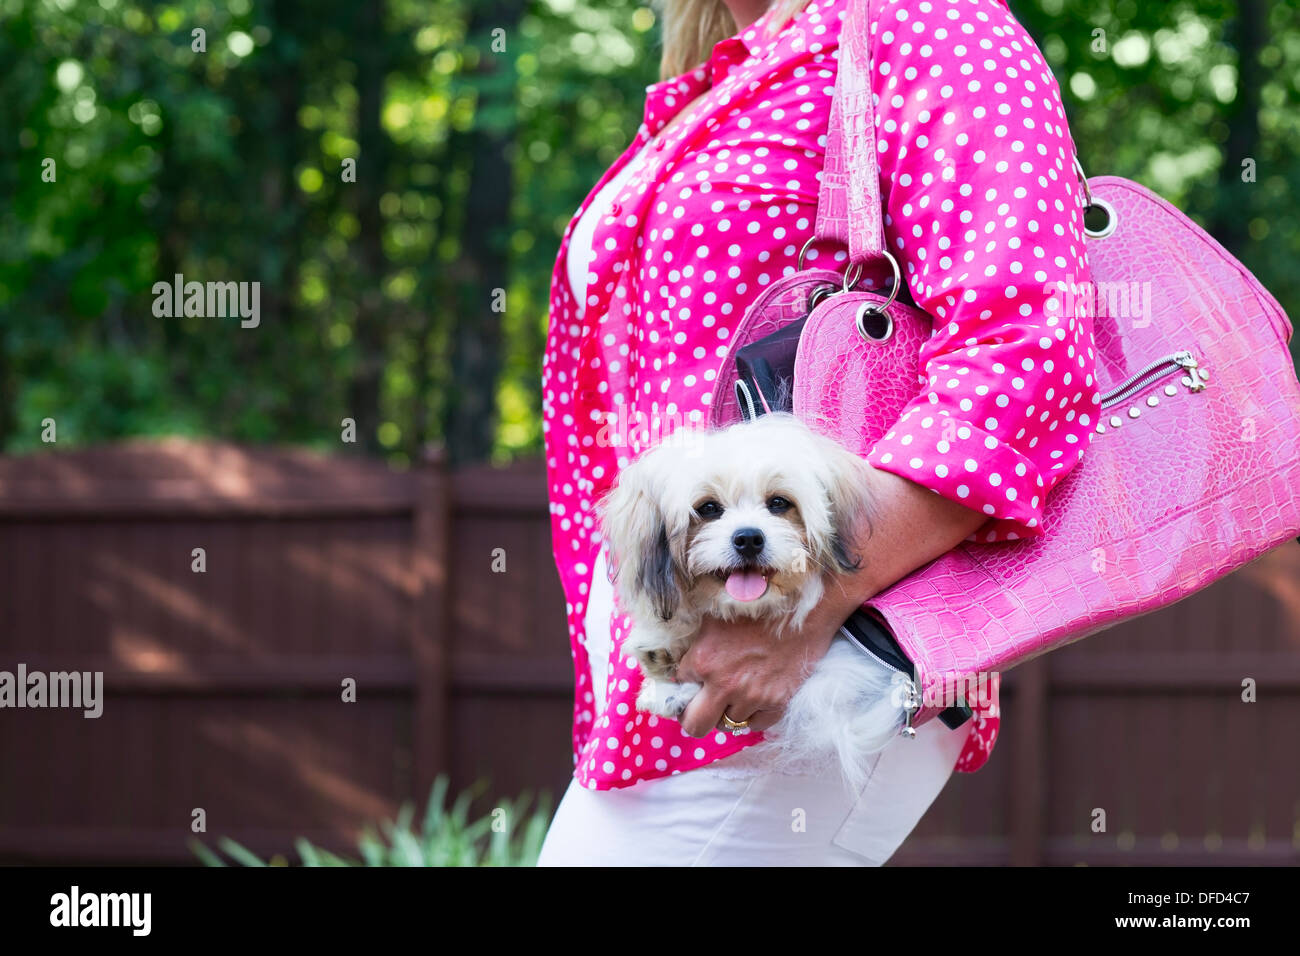 Woman in polka dot shirt carrying small white dog in a pink leather carrier purse Stock Photo